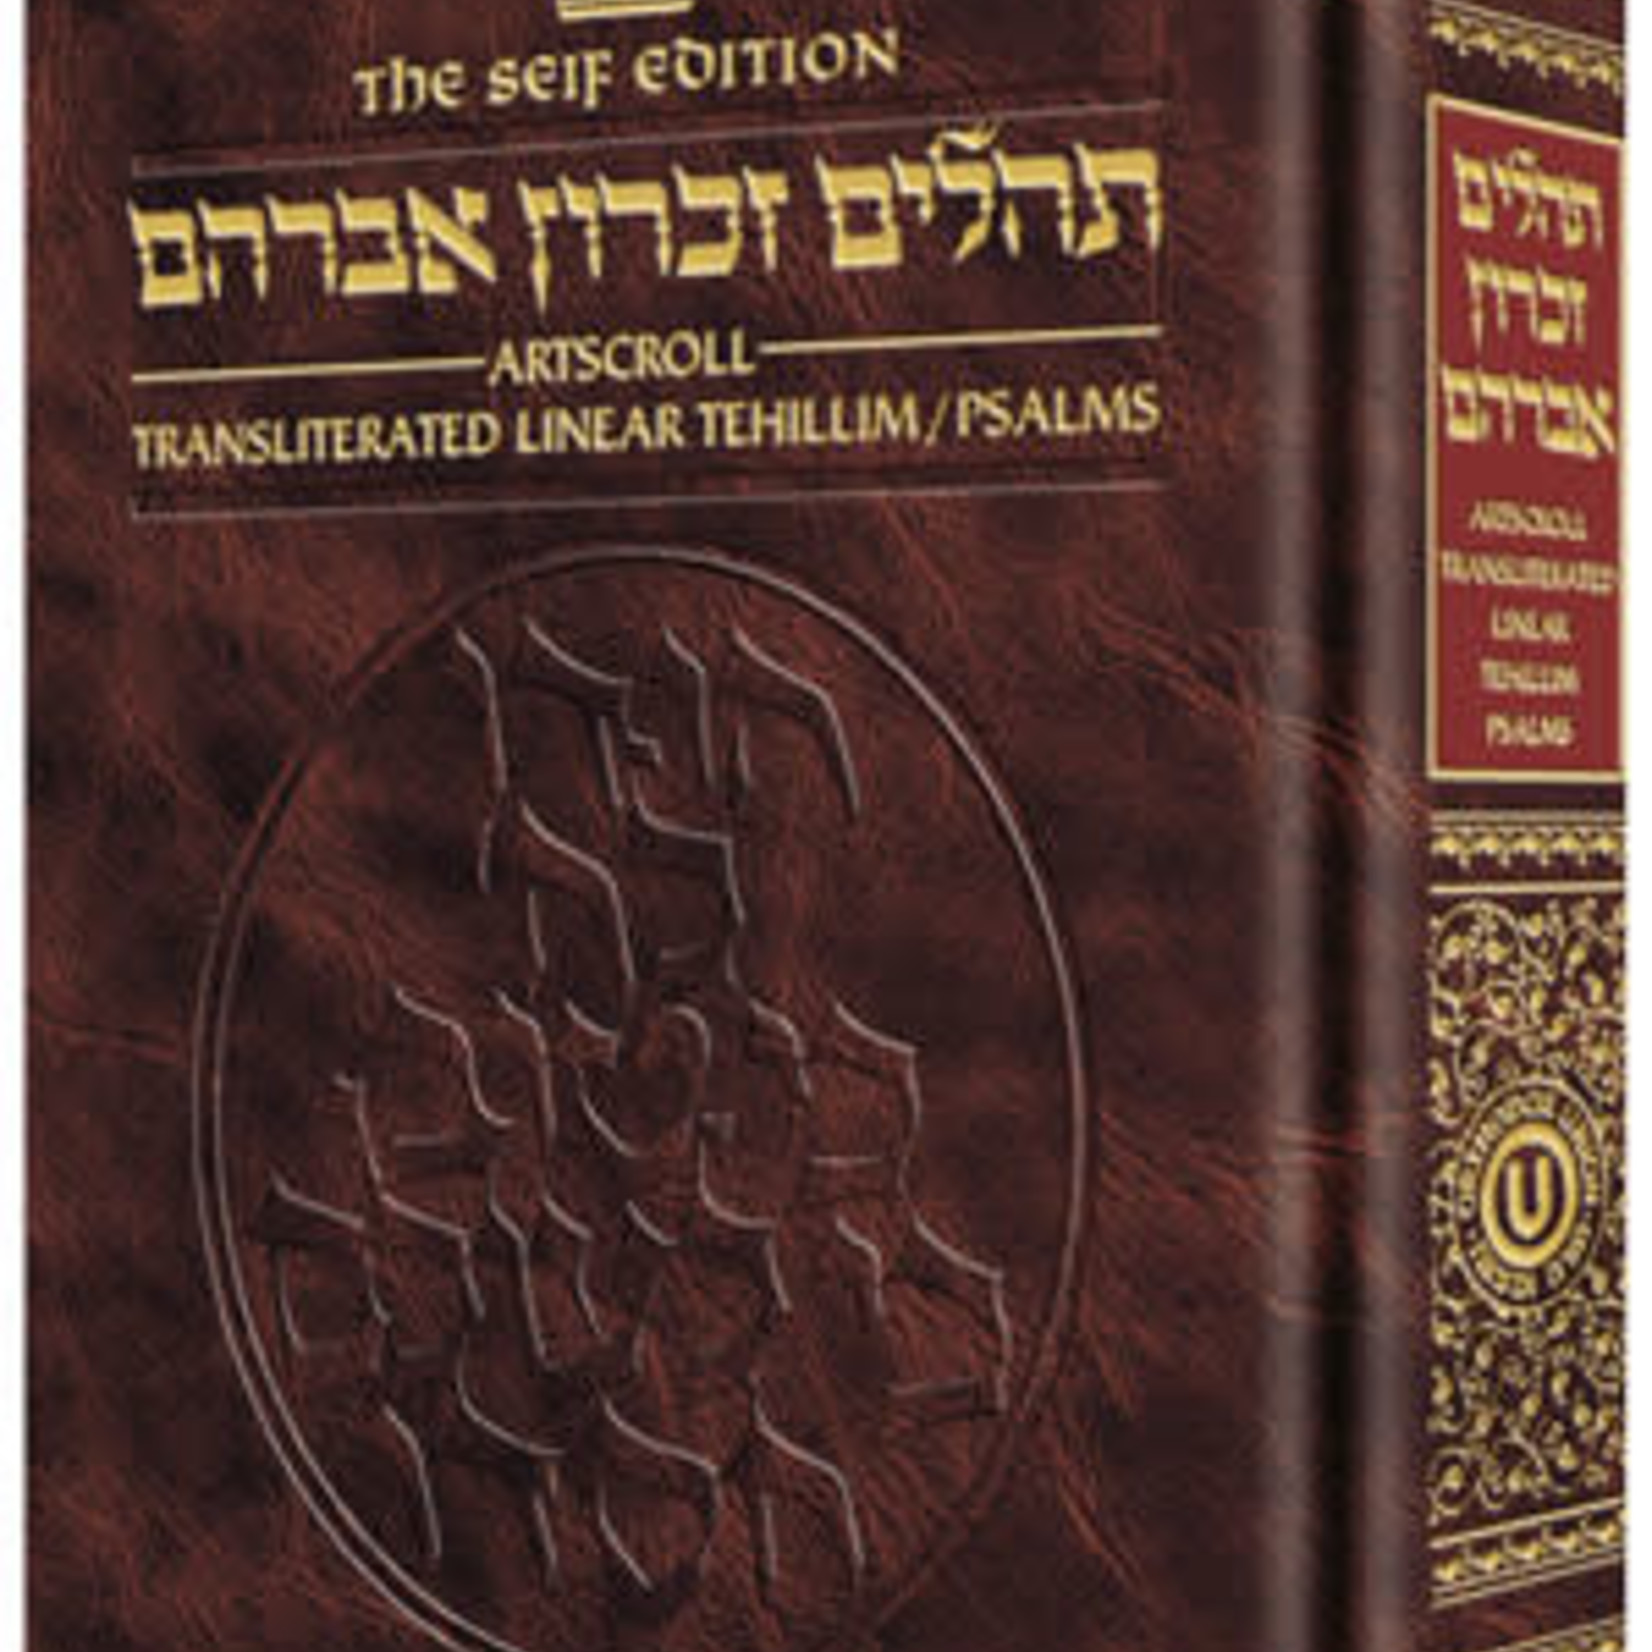 Tehillim: Transliterated Linear - Seif Edition [Hardcover]